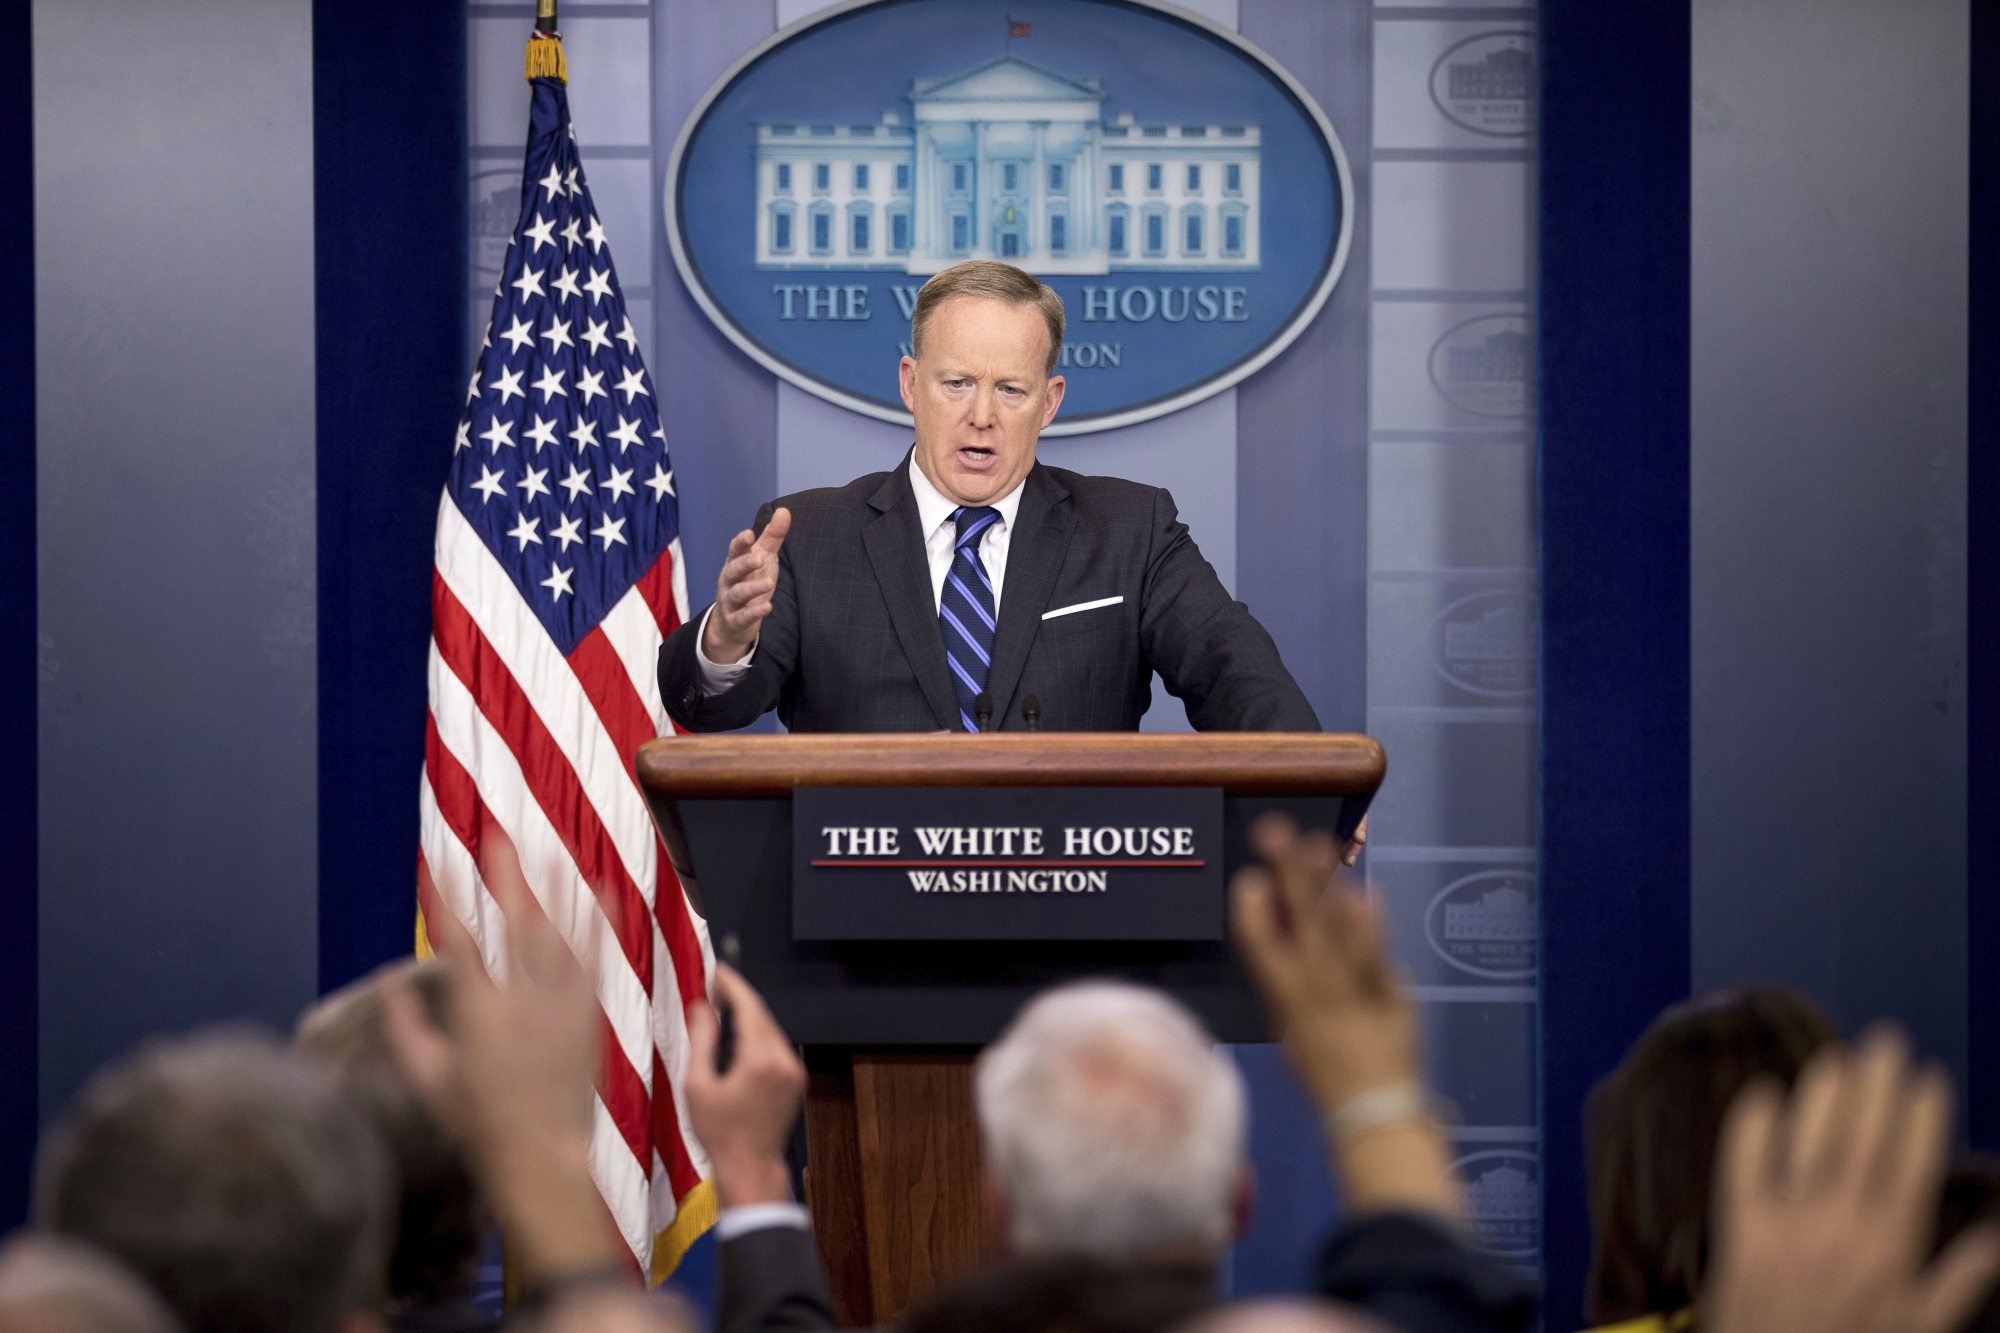 White House press secretary Sean Spicer talks to the media during the daily press briefing at the White House in Washington, Monday, April 10, 2017. Spicer discussed Syria, Trump's first one hundred days in office and other topics. (AP Photo/Andrew Harnik) TRUMP